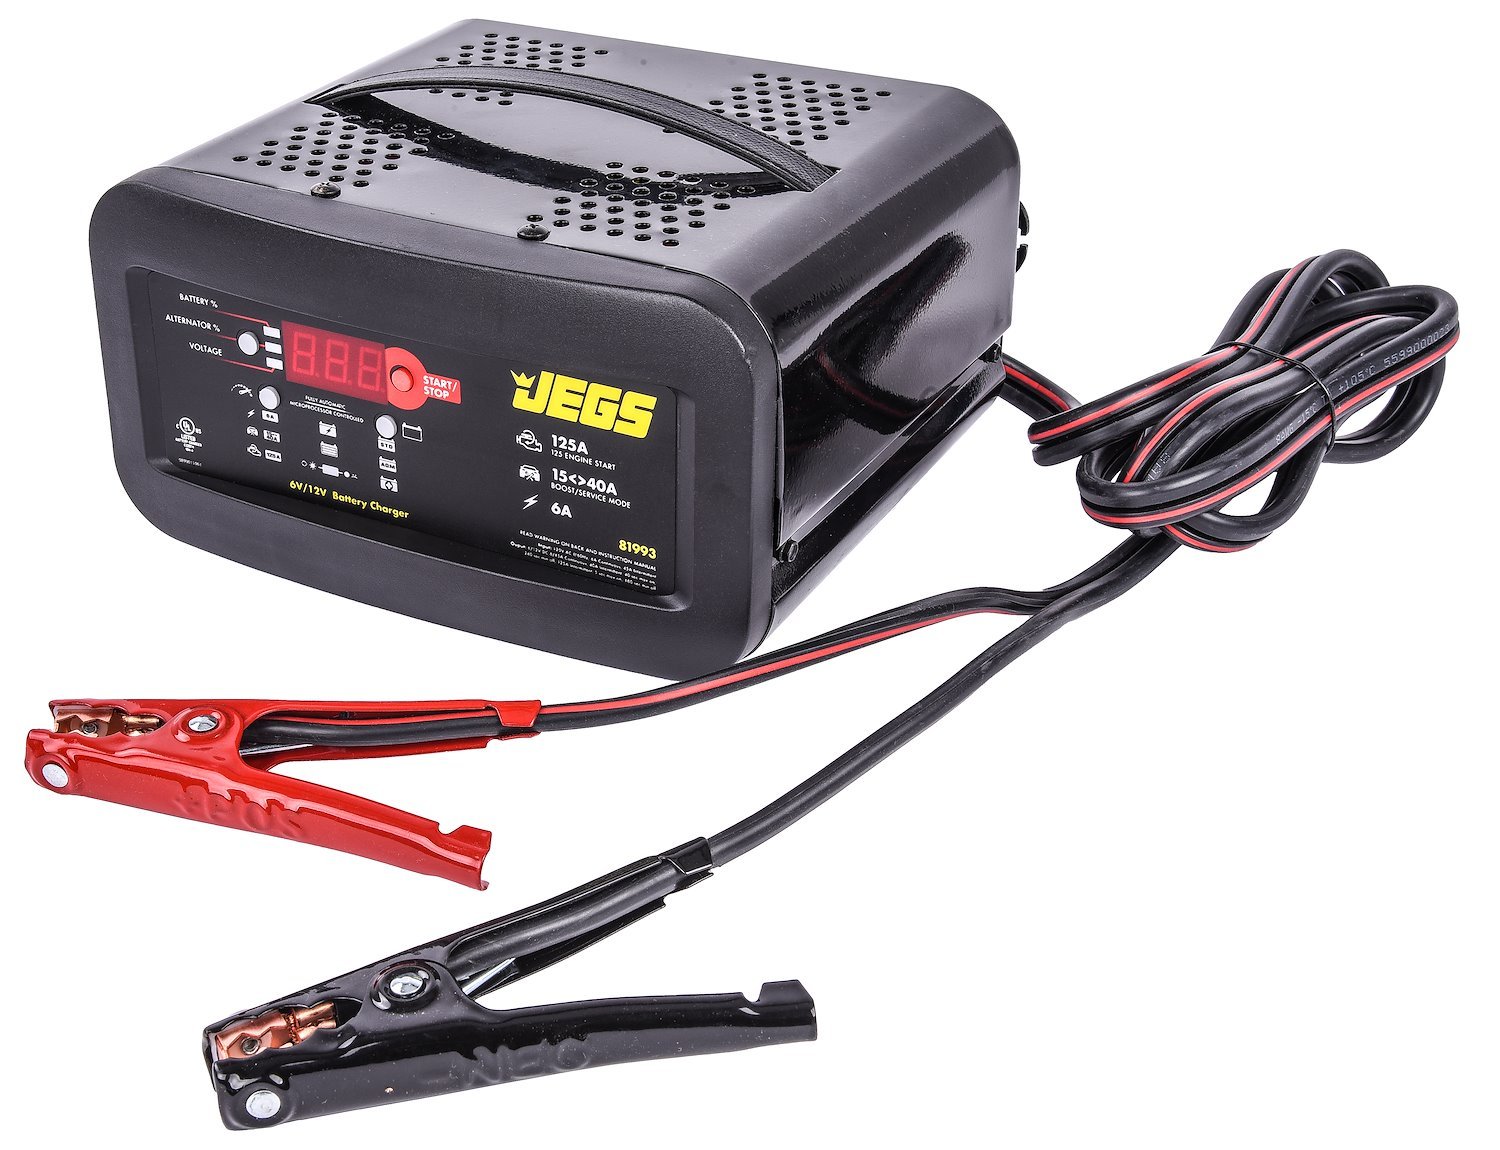 10 Amp 6/12 Volt CAR BATTERY CHARGER MAINTAINER DEEP CYCLE AGM